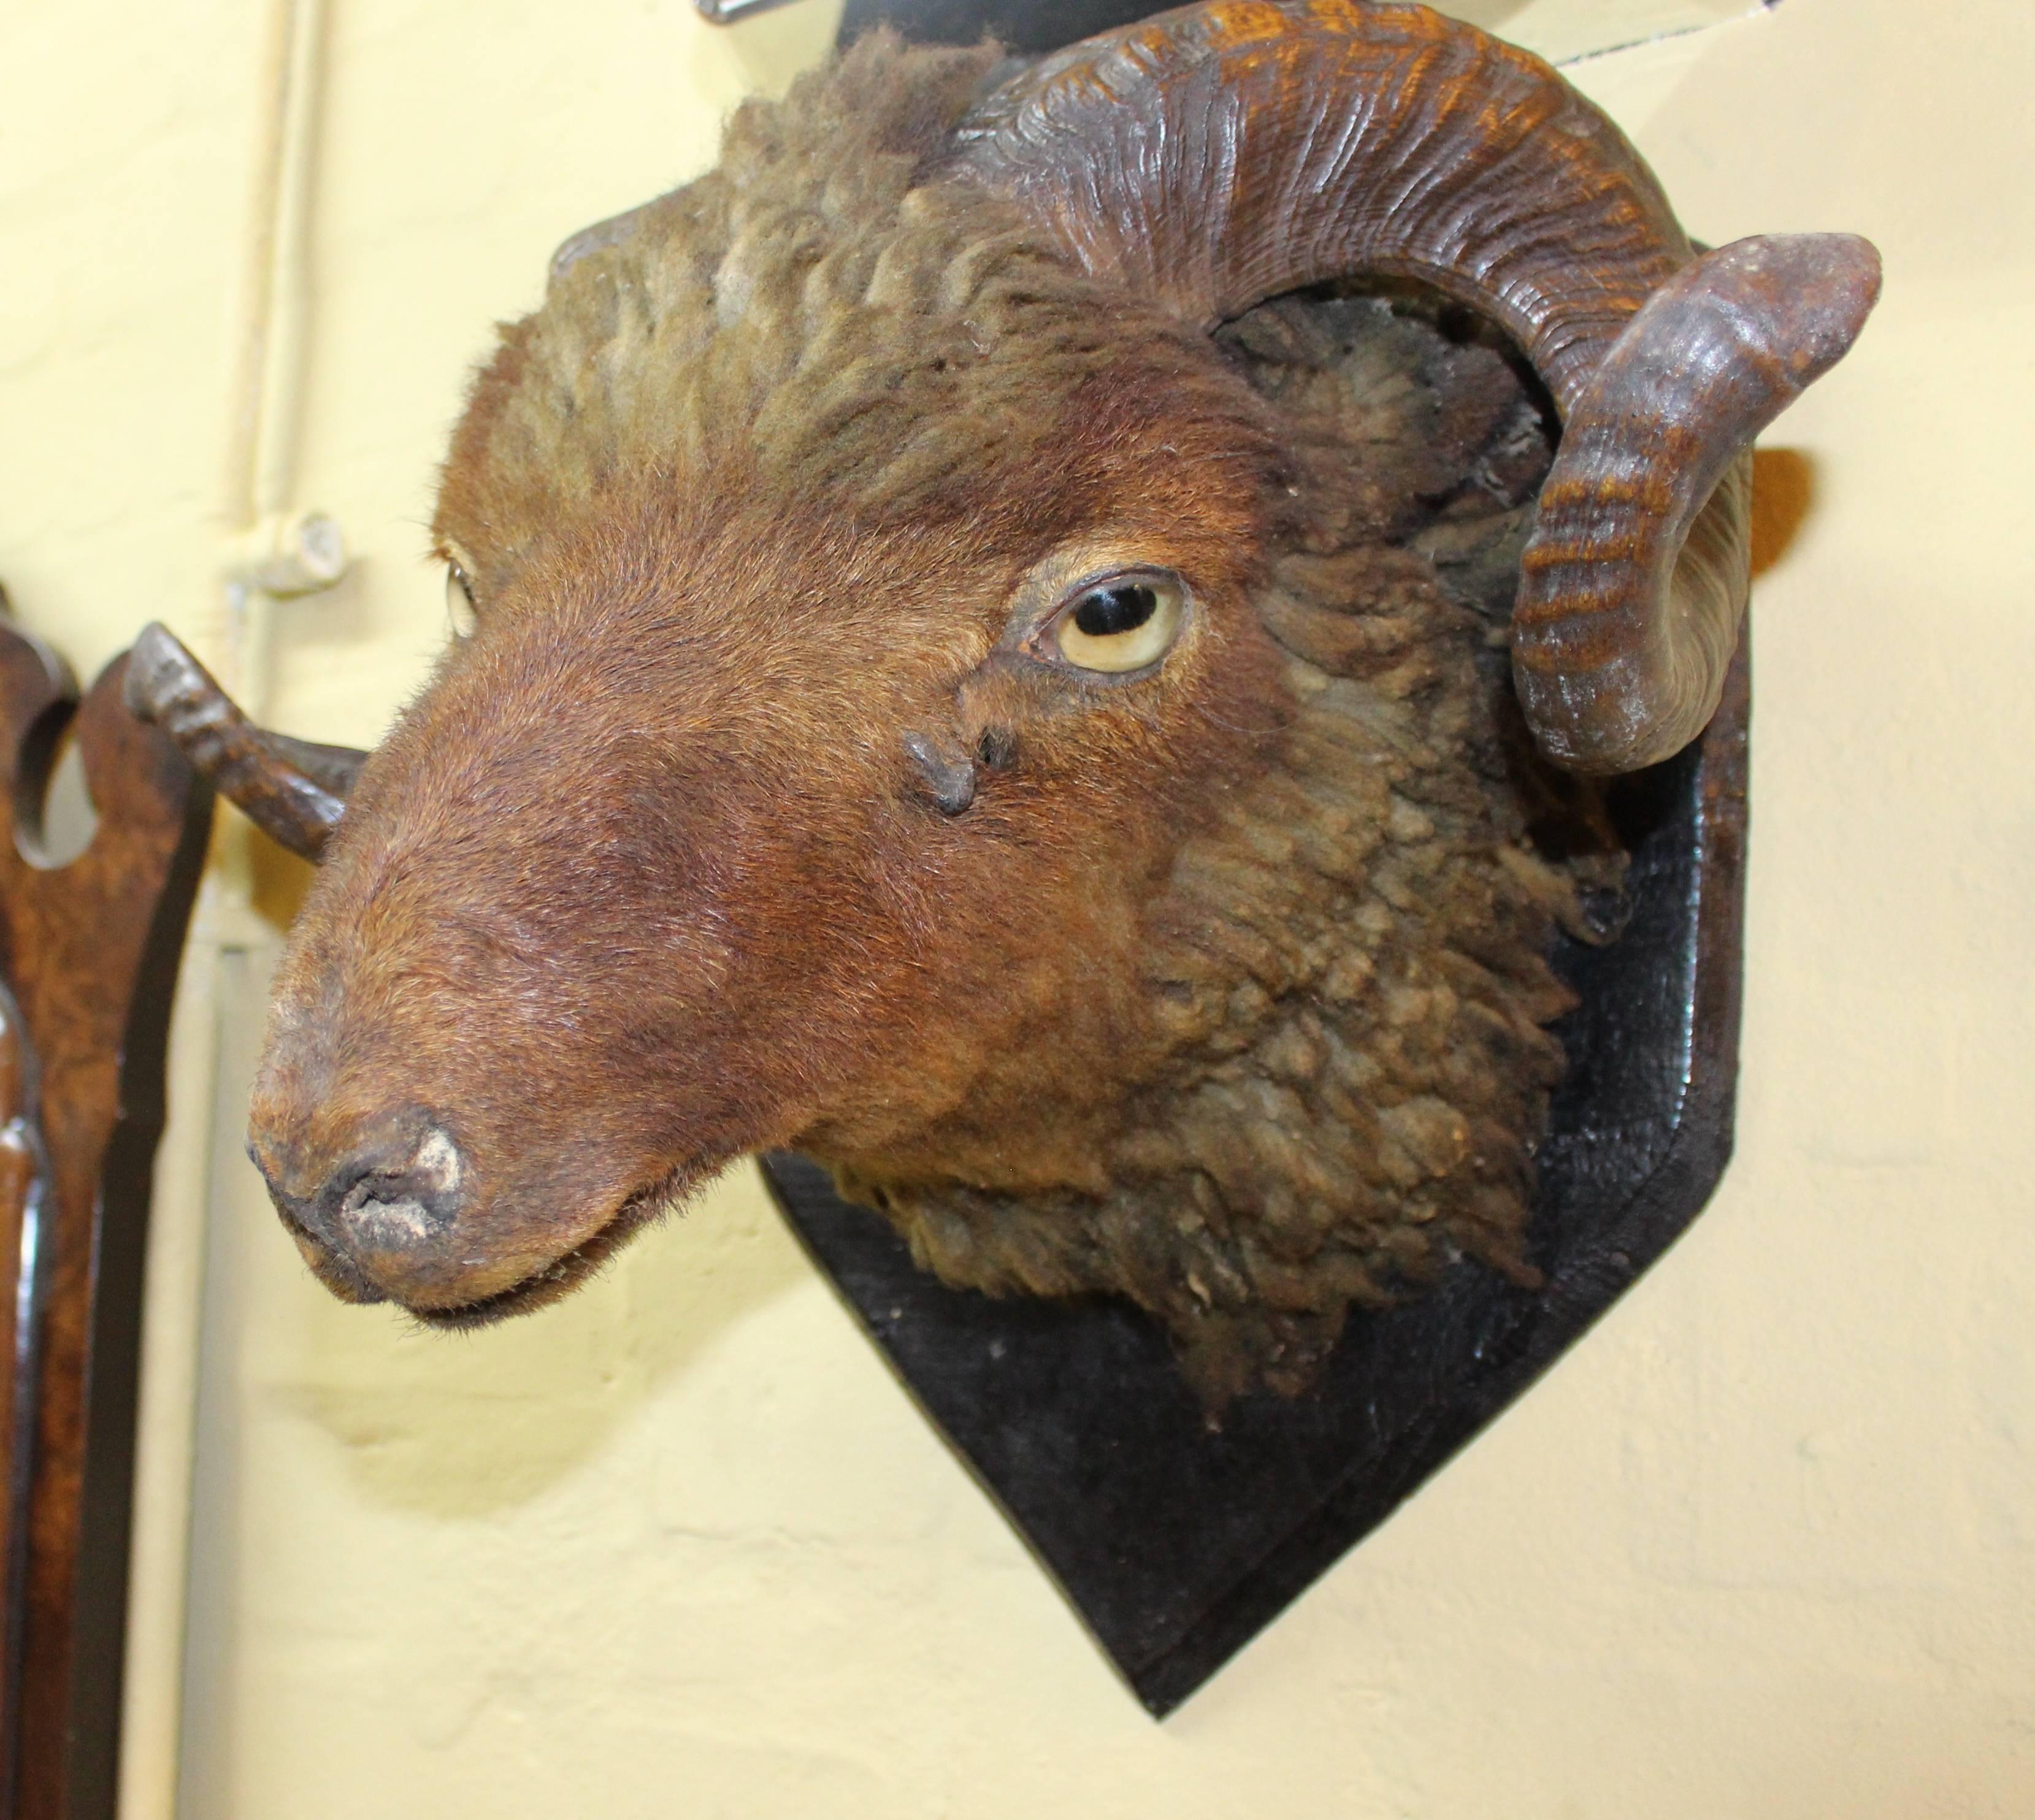 Period 19th century.
Animal ram's head
Measures: Width 43 cm / 17 in
Protrusion 28 cm / 11 in
Height 36 cm / 14 in
Condition Good condition. Some wear commensurate with age, including where left hornn is affixed to head. No damage to